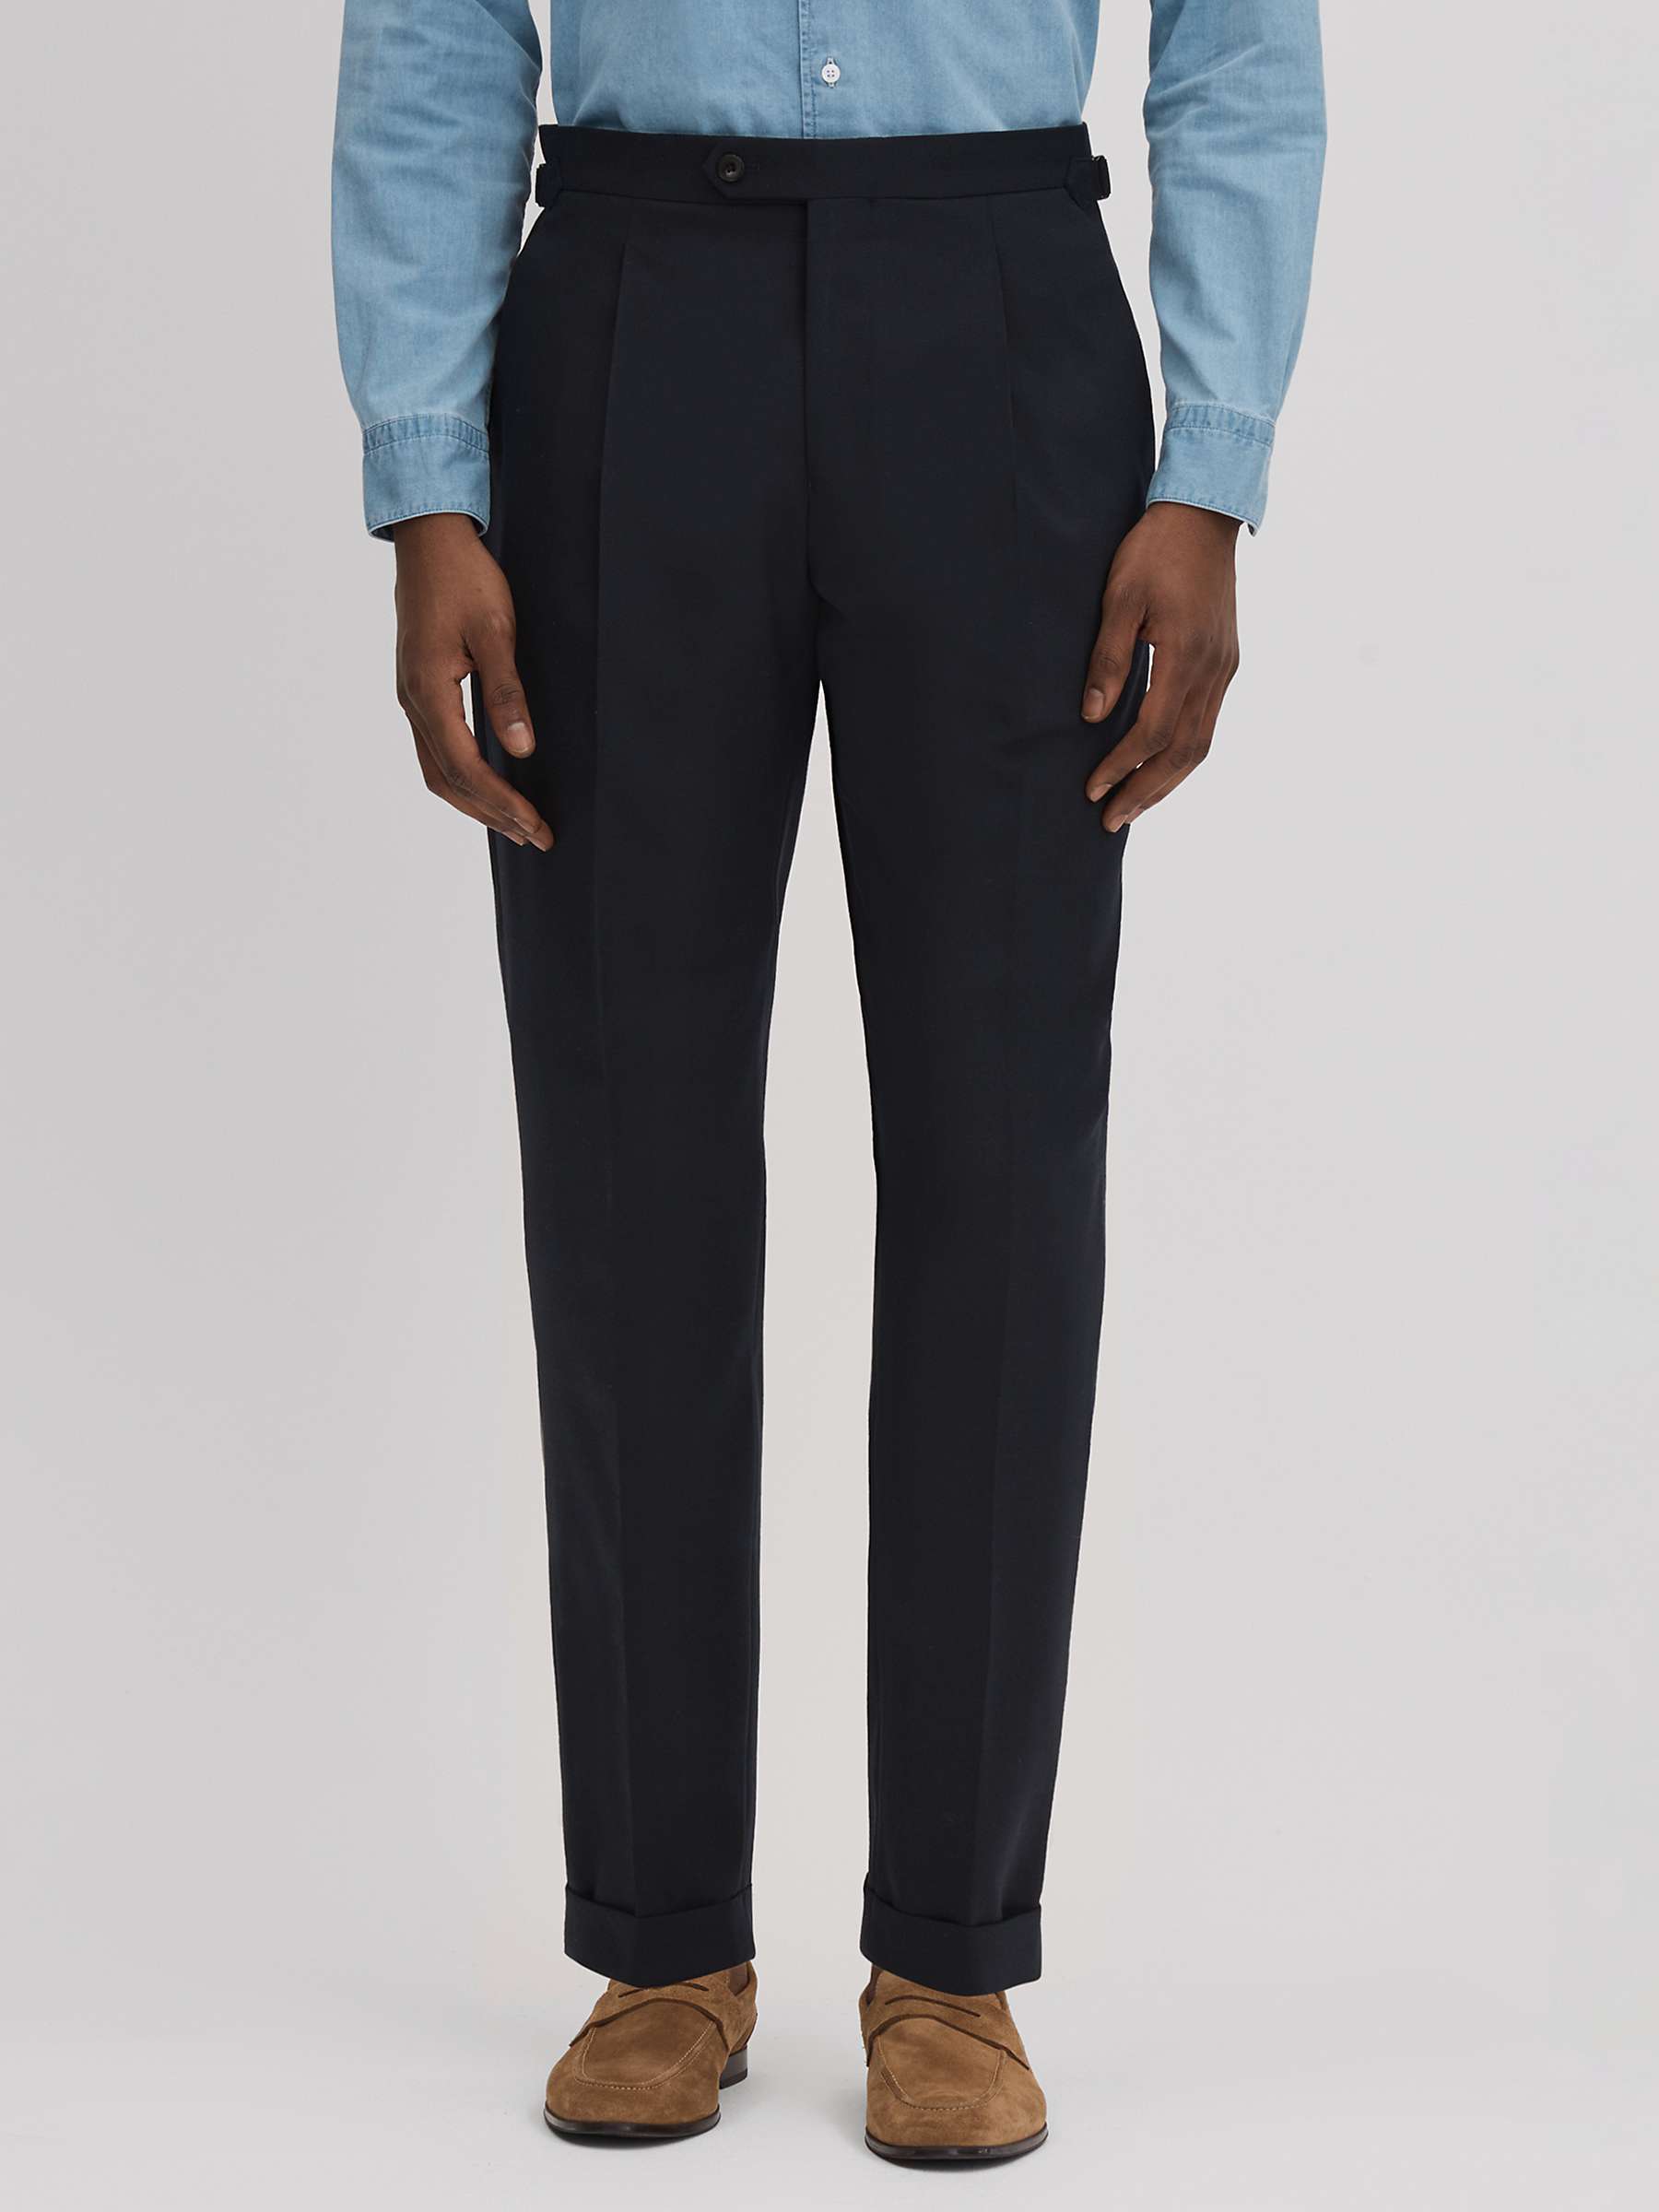 Buy Reiss Valentine Hopsack Trousers Online at johnlewis.com